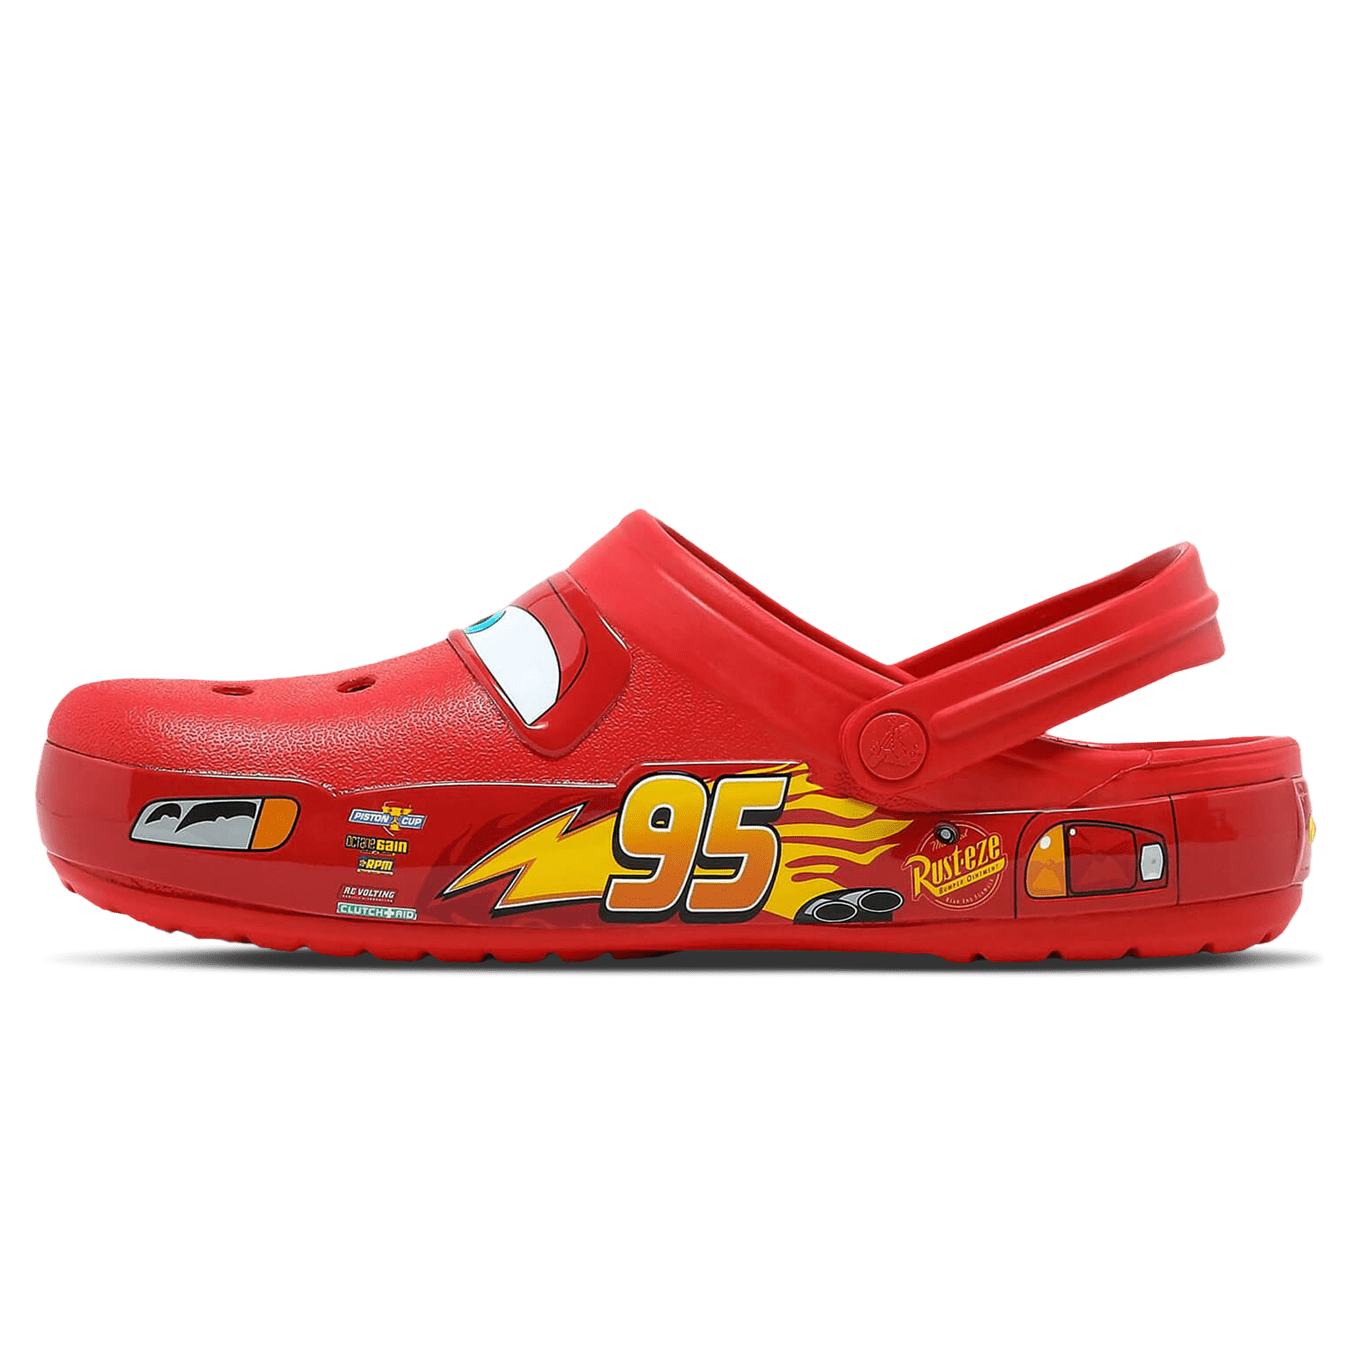 Cars Converse, Boys Shoes, Lightning Mcqueen, Toddler Sizes, Many Colors,  Personalized Name - Etsy